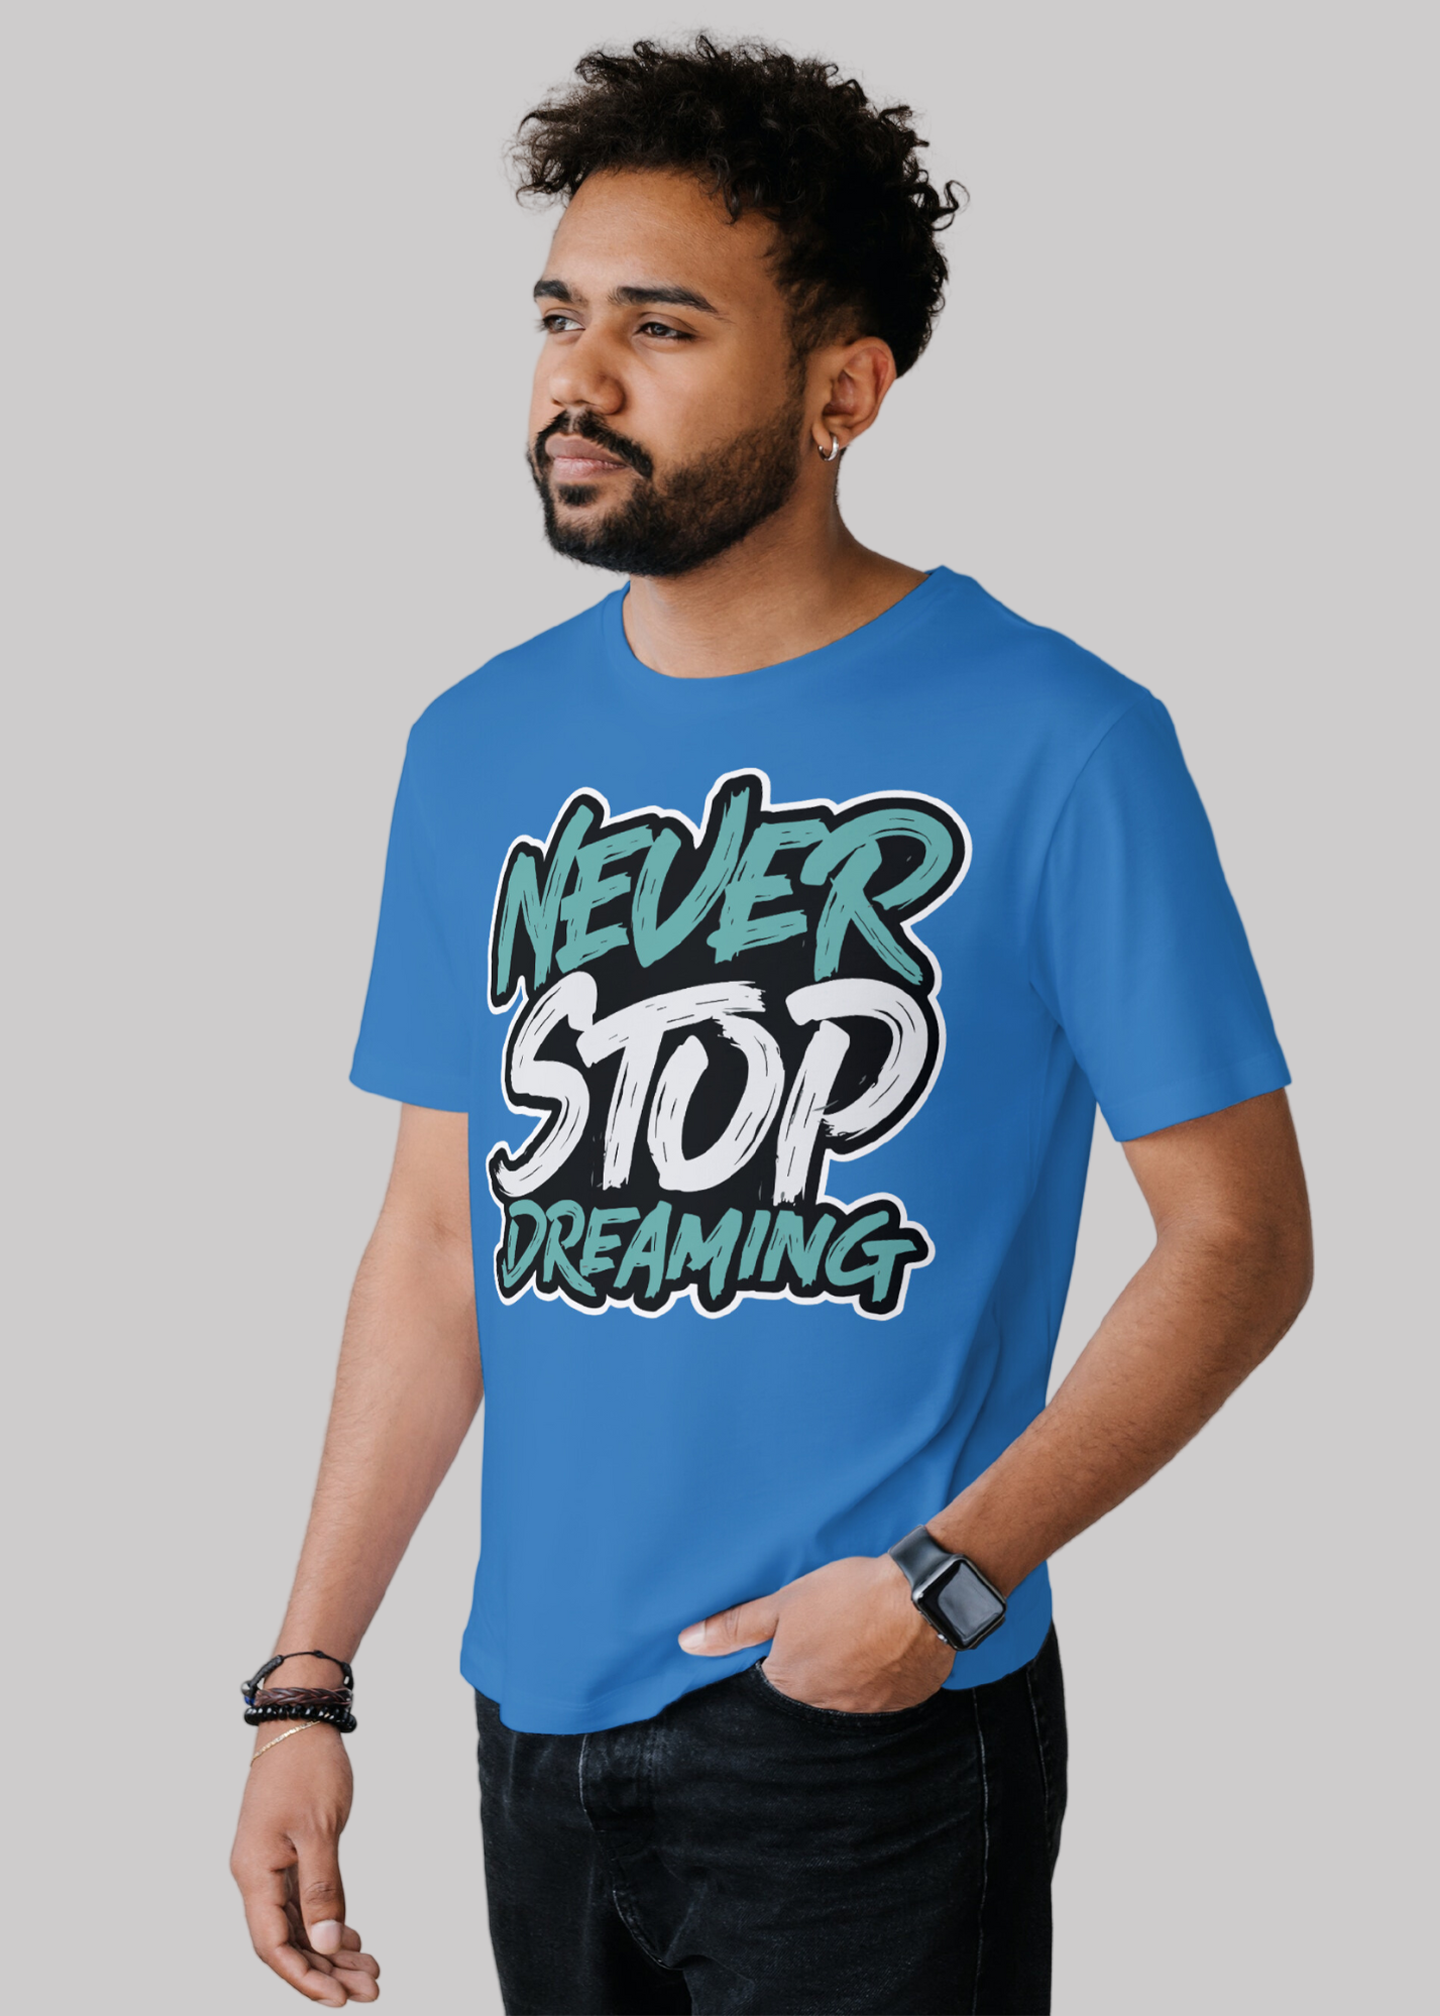 Never stop dreaming Printed Half Sleeve Premium Cotton T-shirt For Men